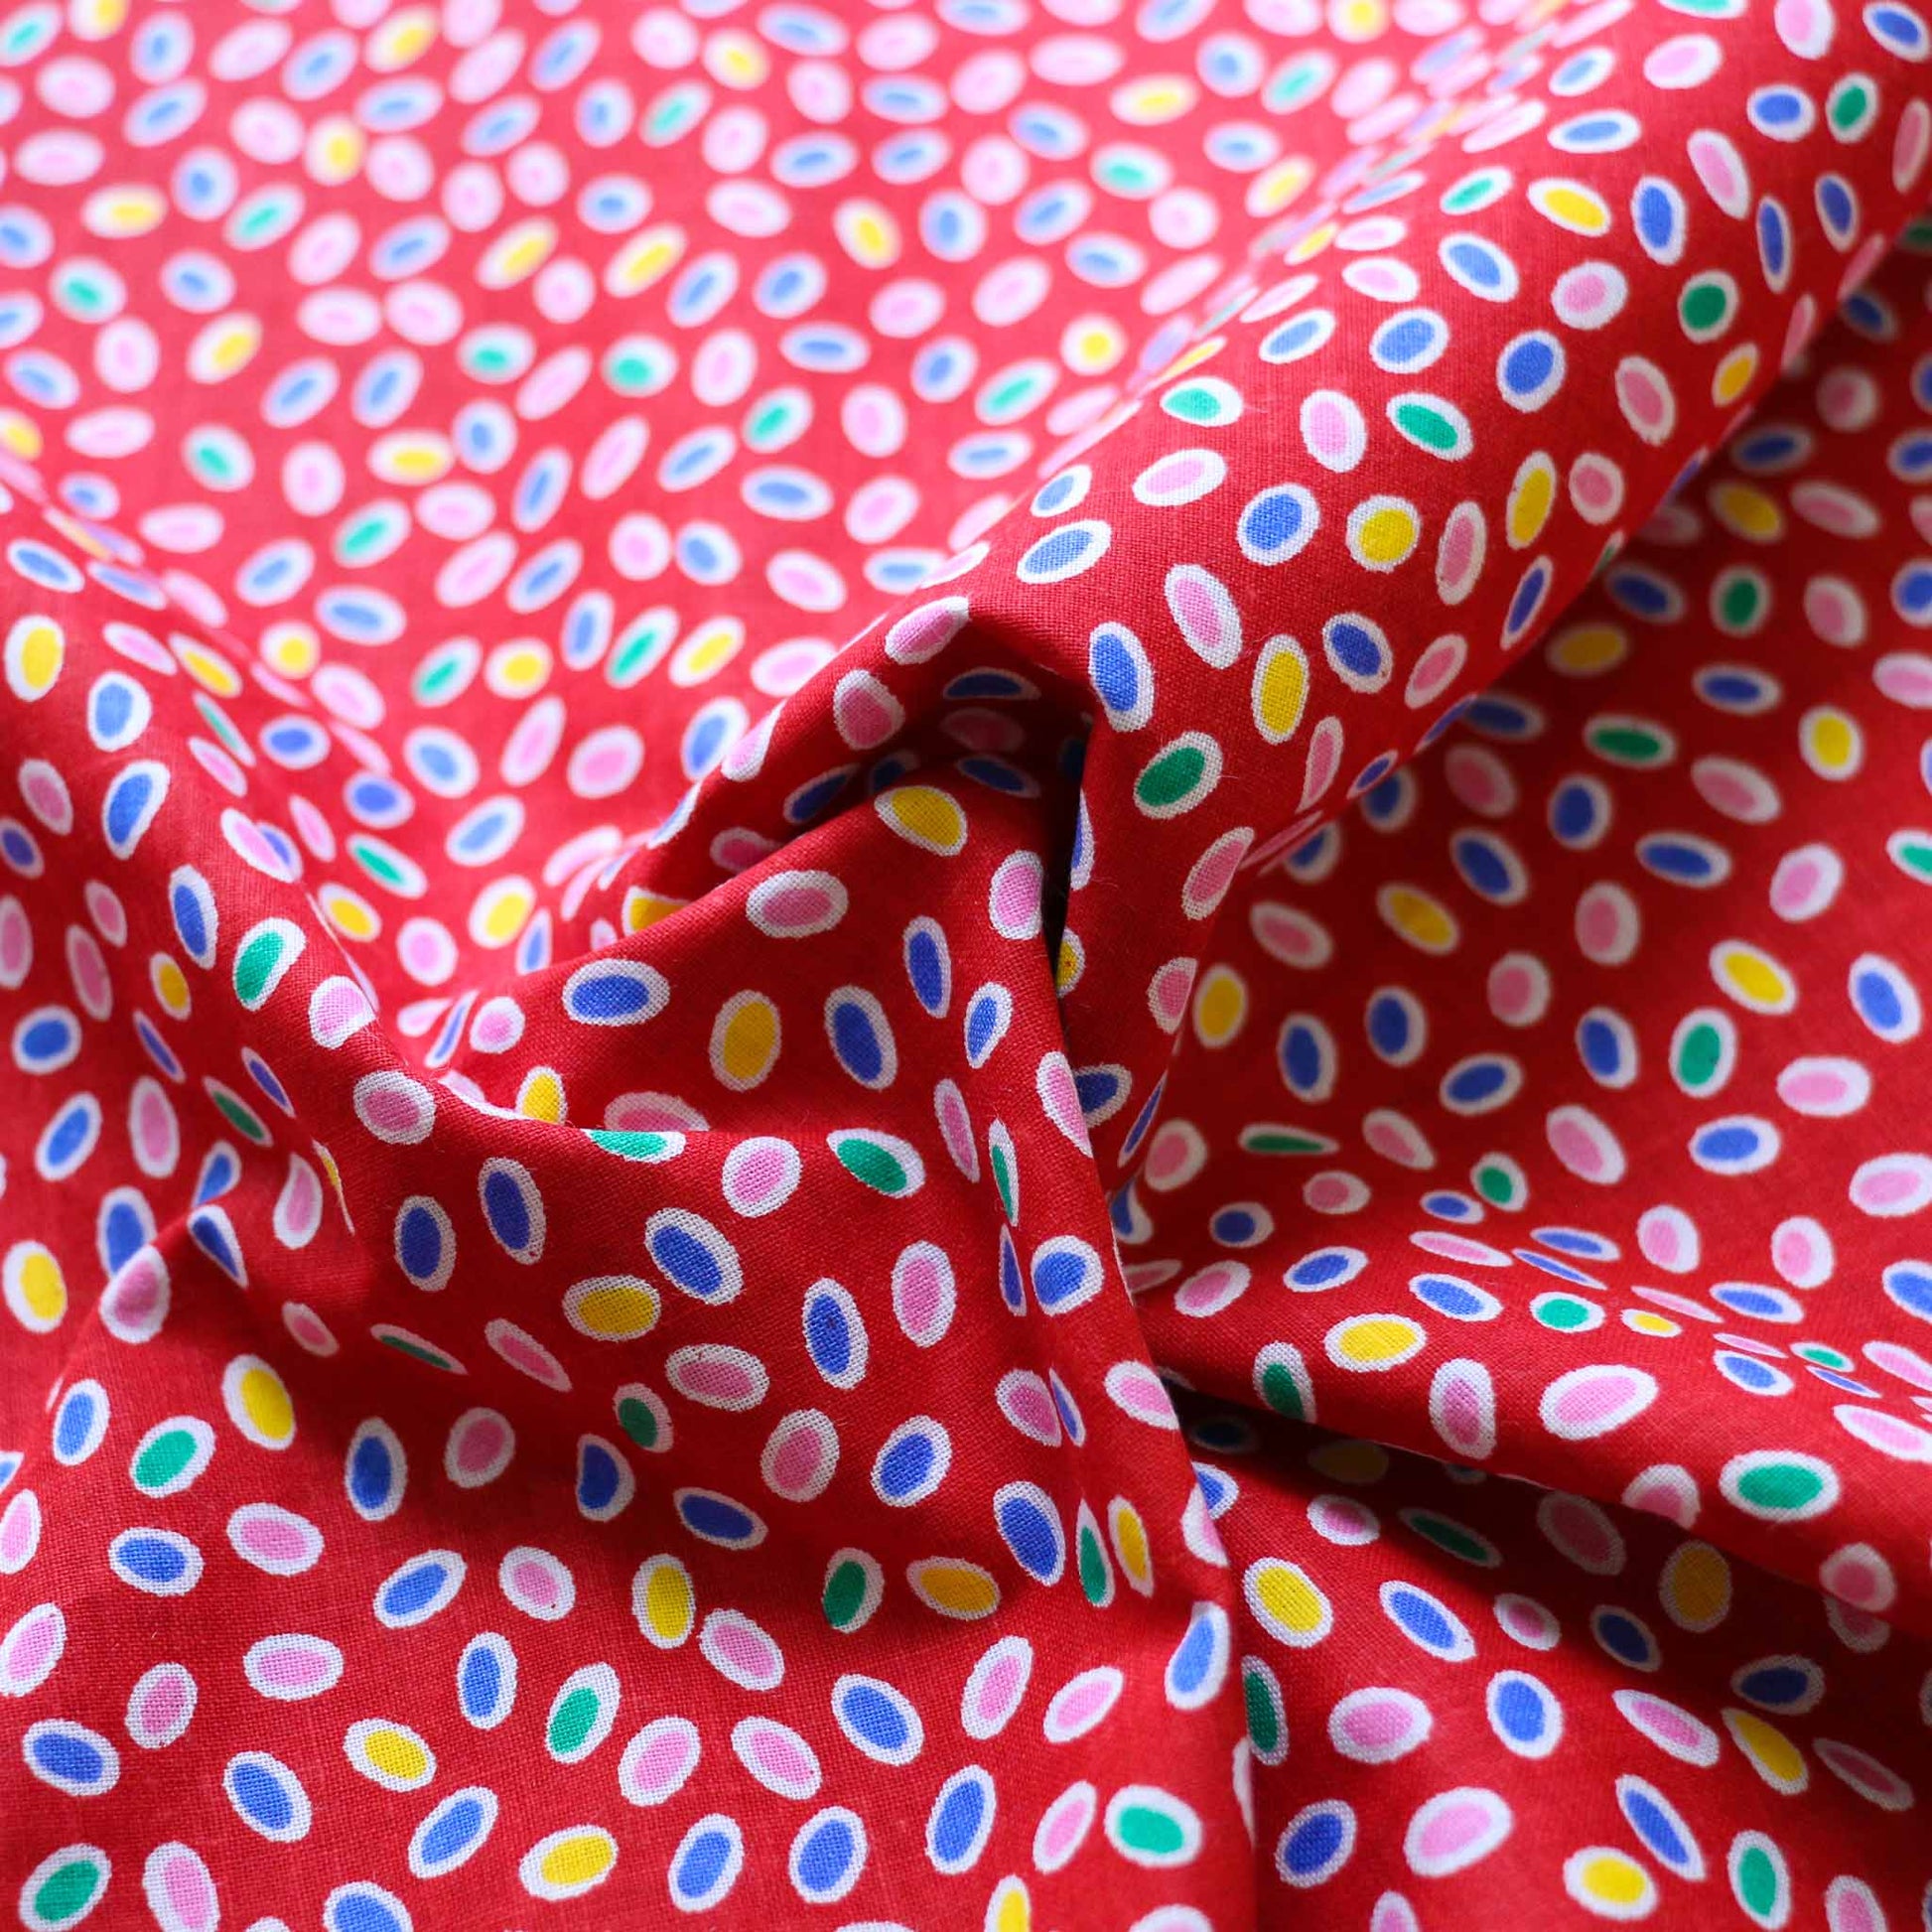 vintage sustainable cotton dressmaking fabric with retro dots pattern